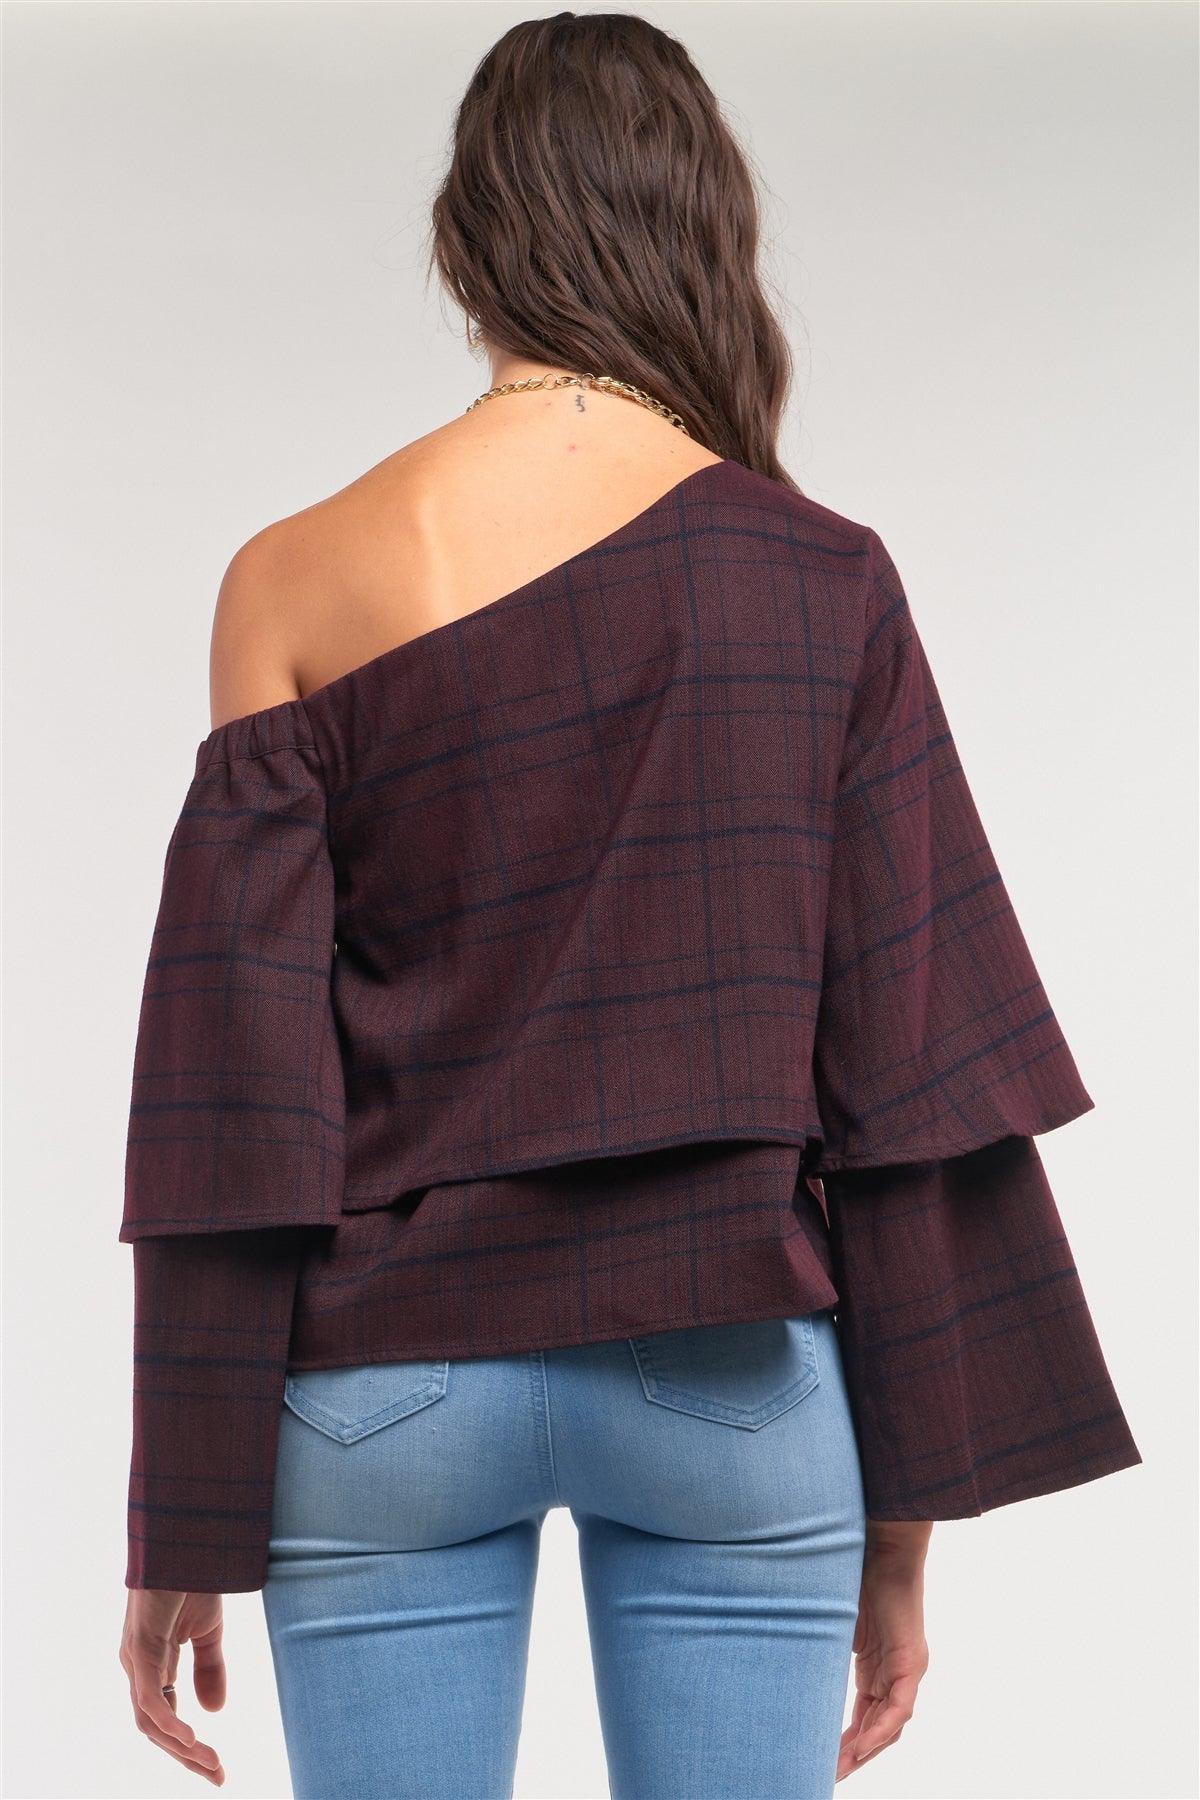 Plum Navy Plaid One-Shoulder Long Sleeve Loose Fit Layered Top /2-2-2